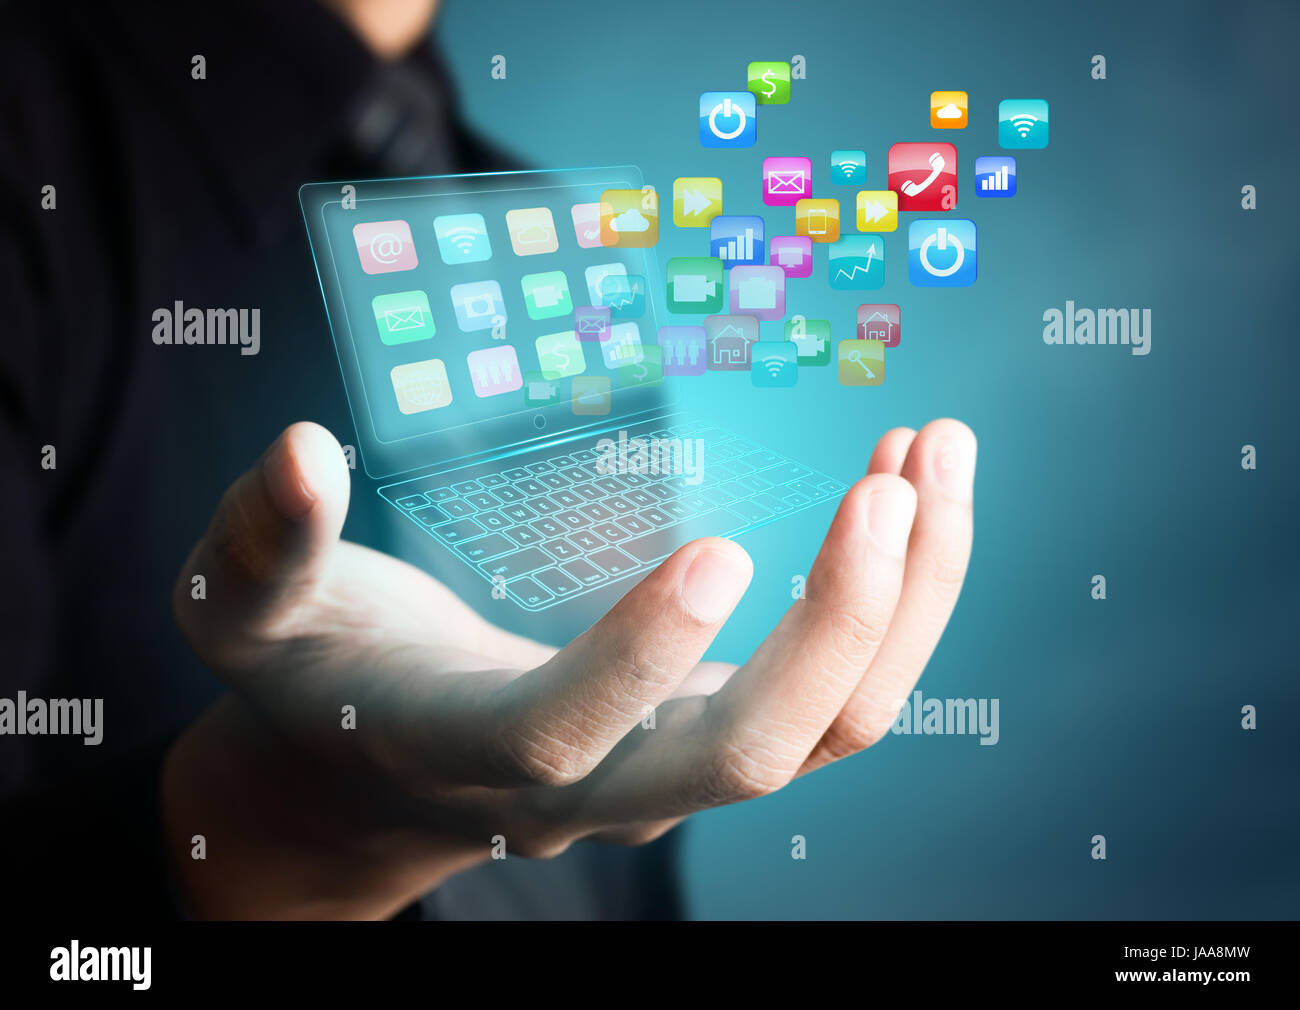 Touch screen tablet with cloud of colorful application icons Stock Photo